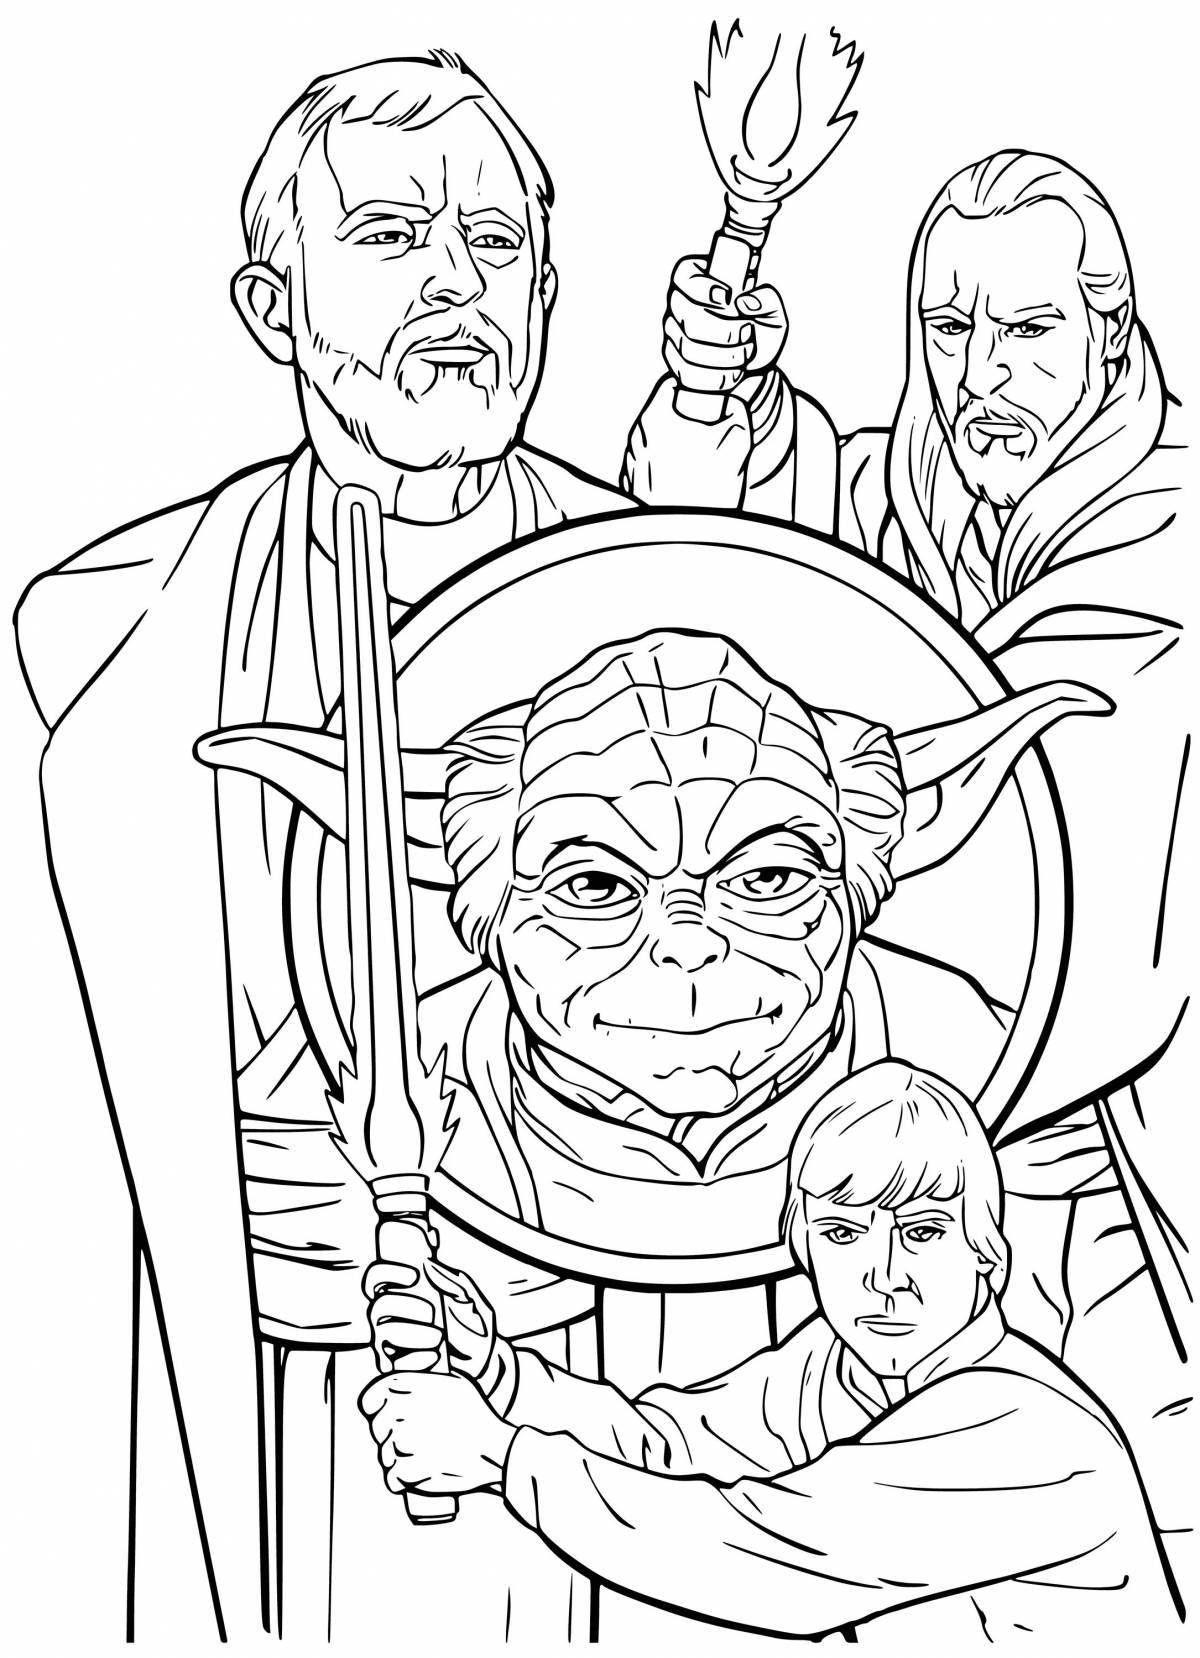 Exotic star wars coloring book